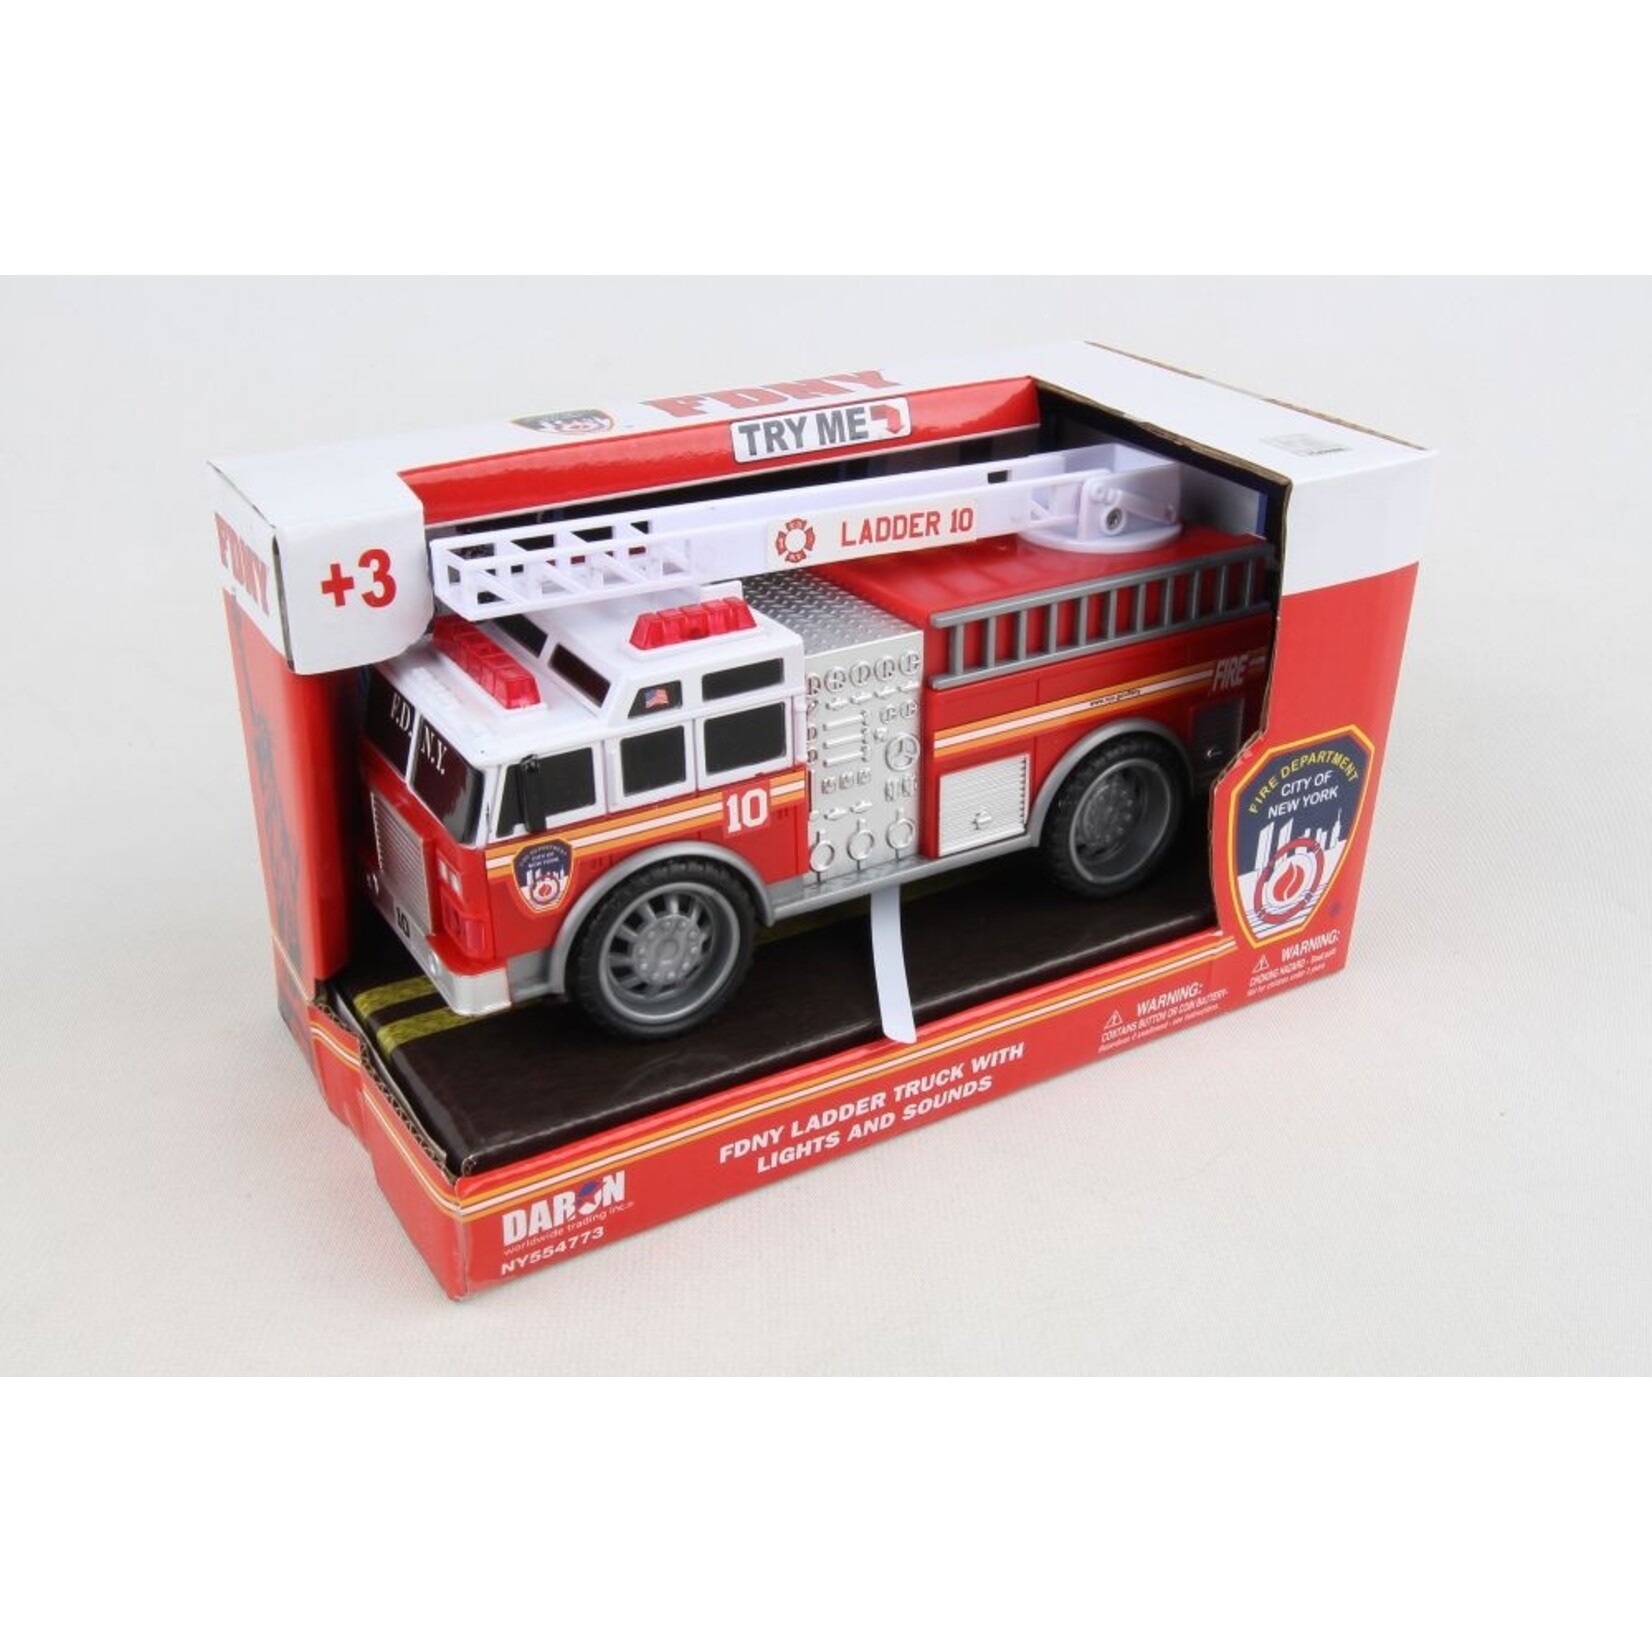 Daron Worldwide FDNY Fire Truck with Lights & Sound